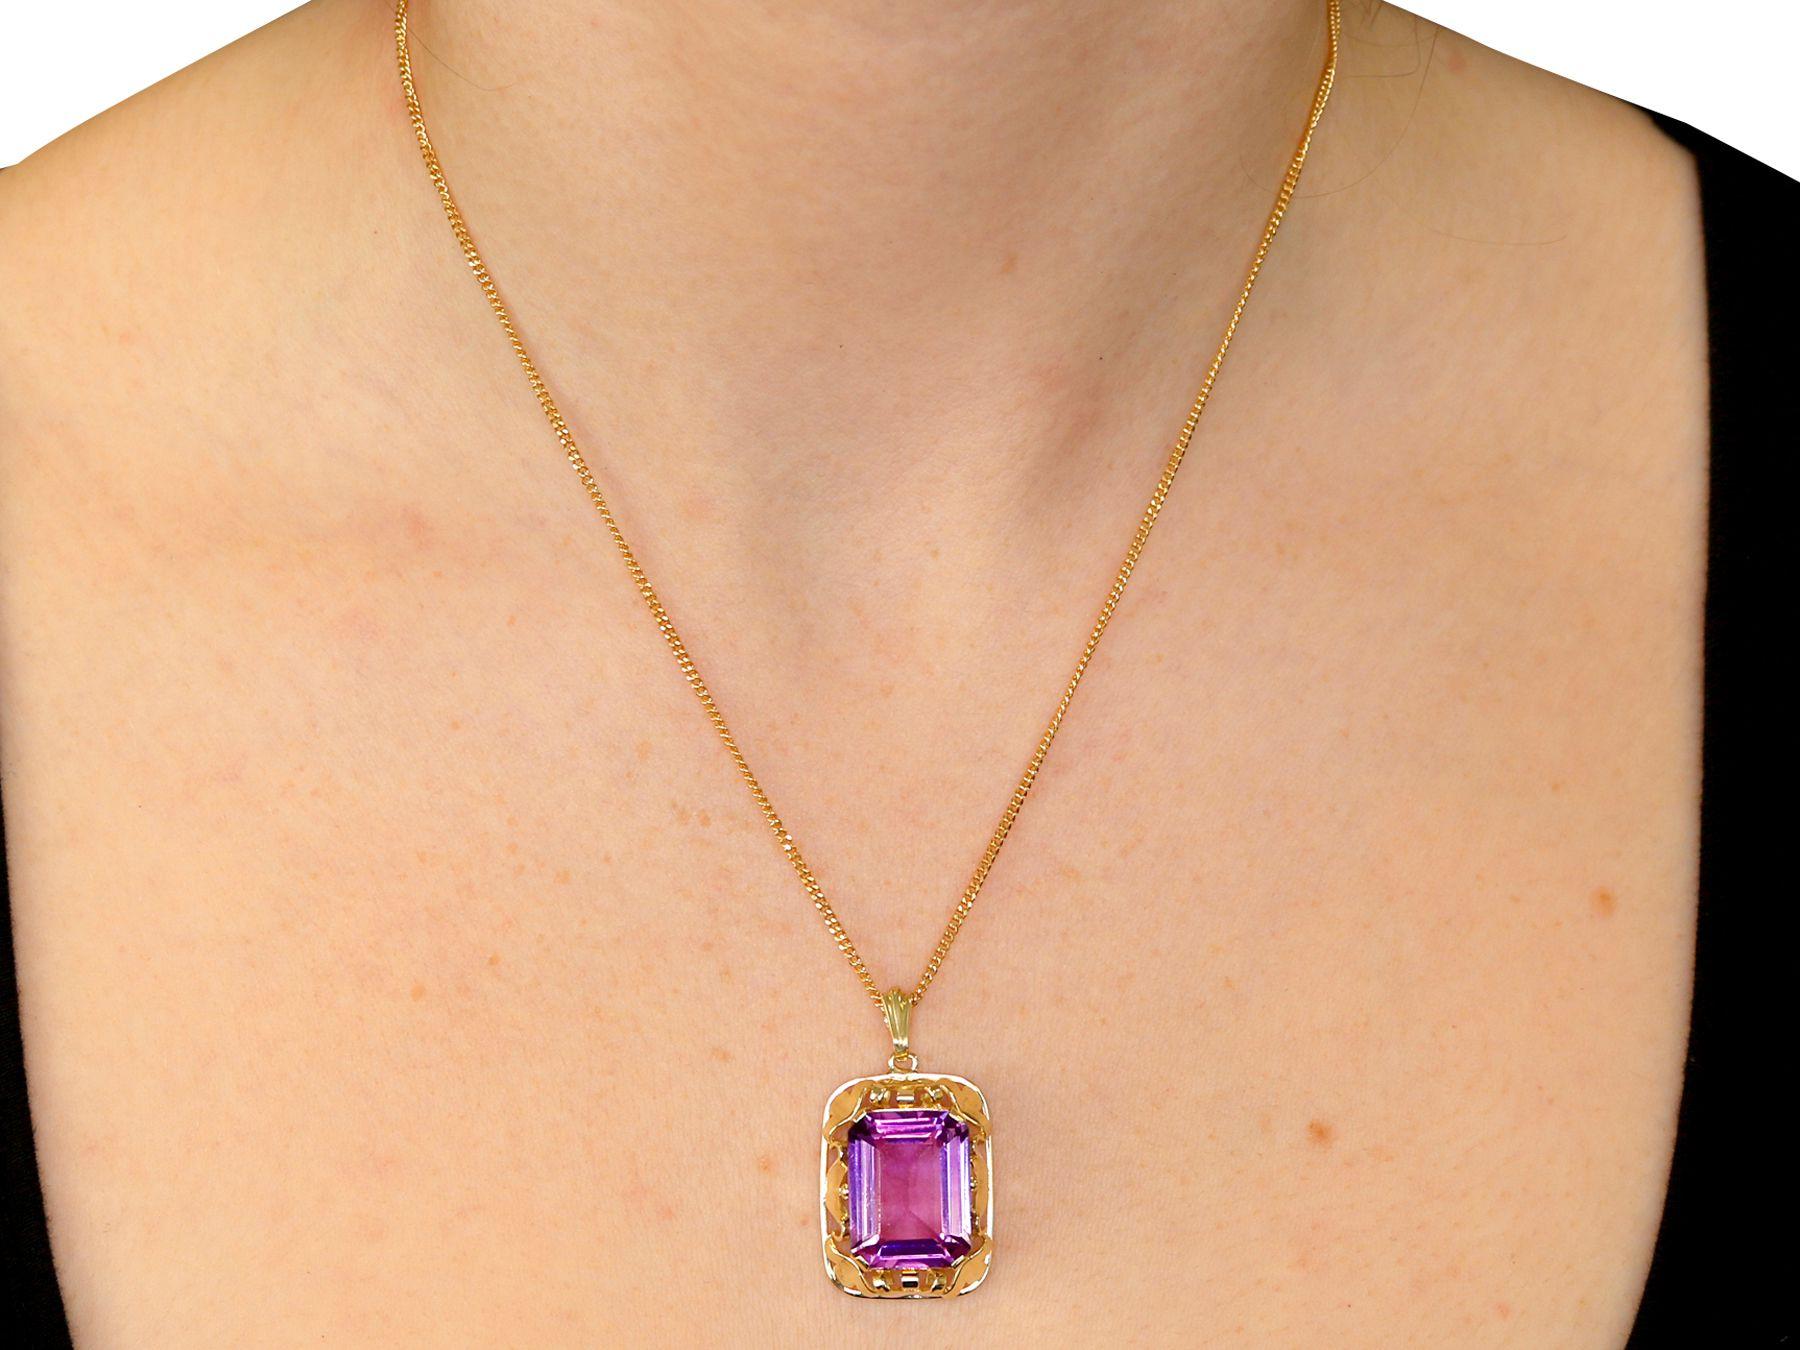 Vintage 1950s 15.41 Carat Amethyst and Yellow Gold Pendant For Sale 2